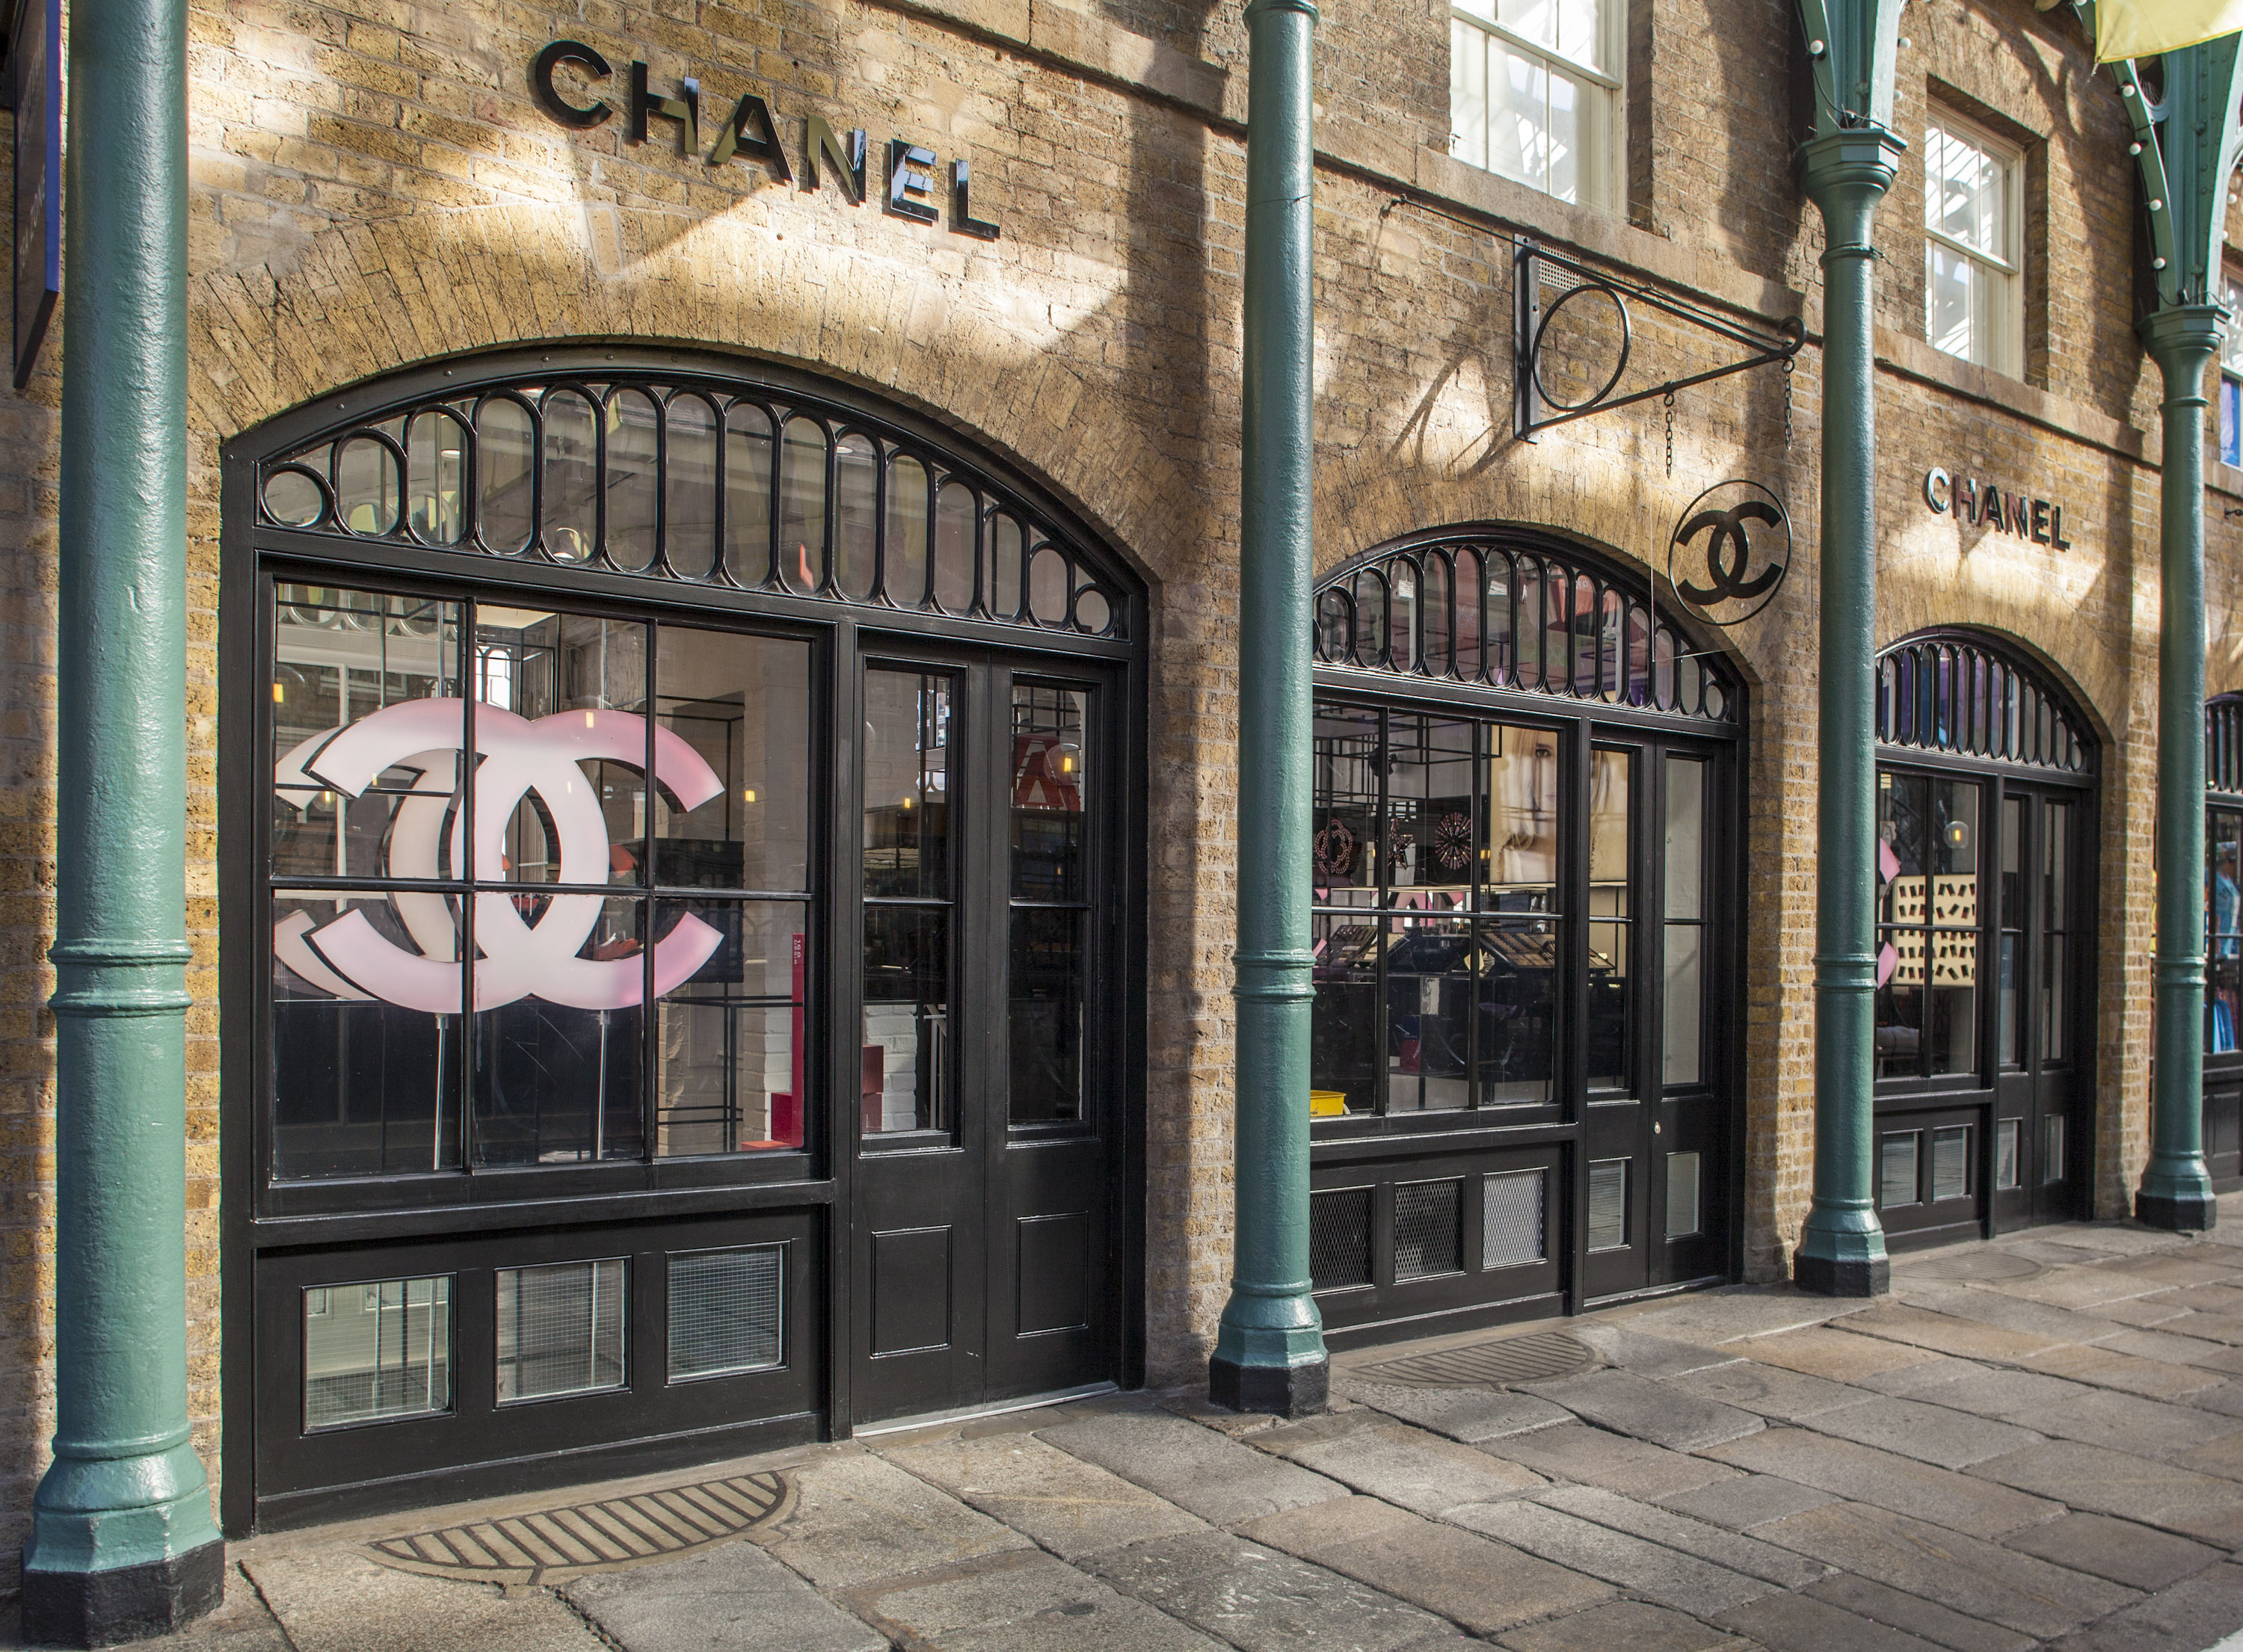 Chanel pop-up store offers bridal beauty services in London for £90